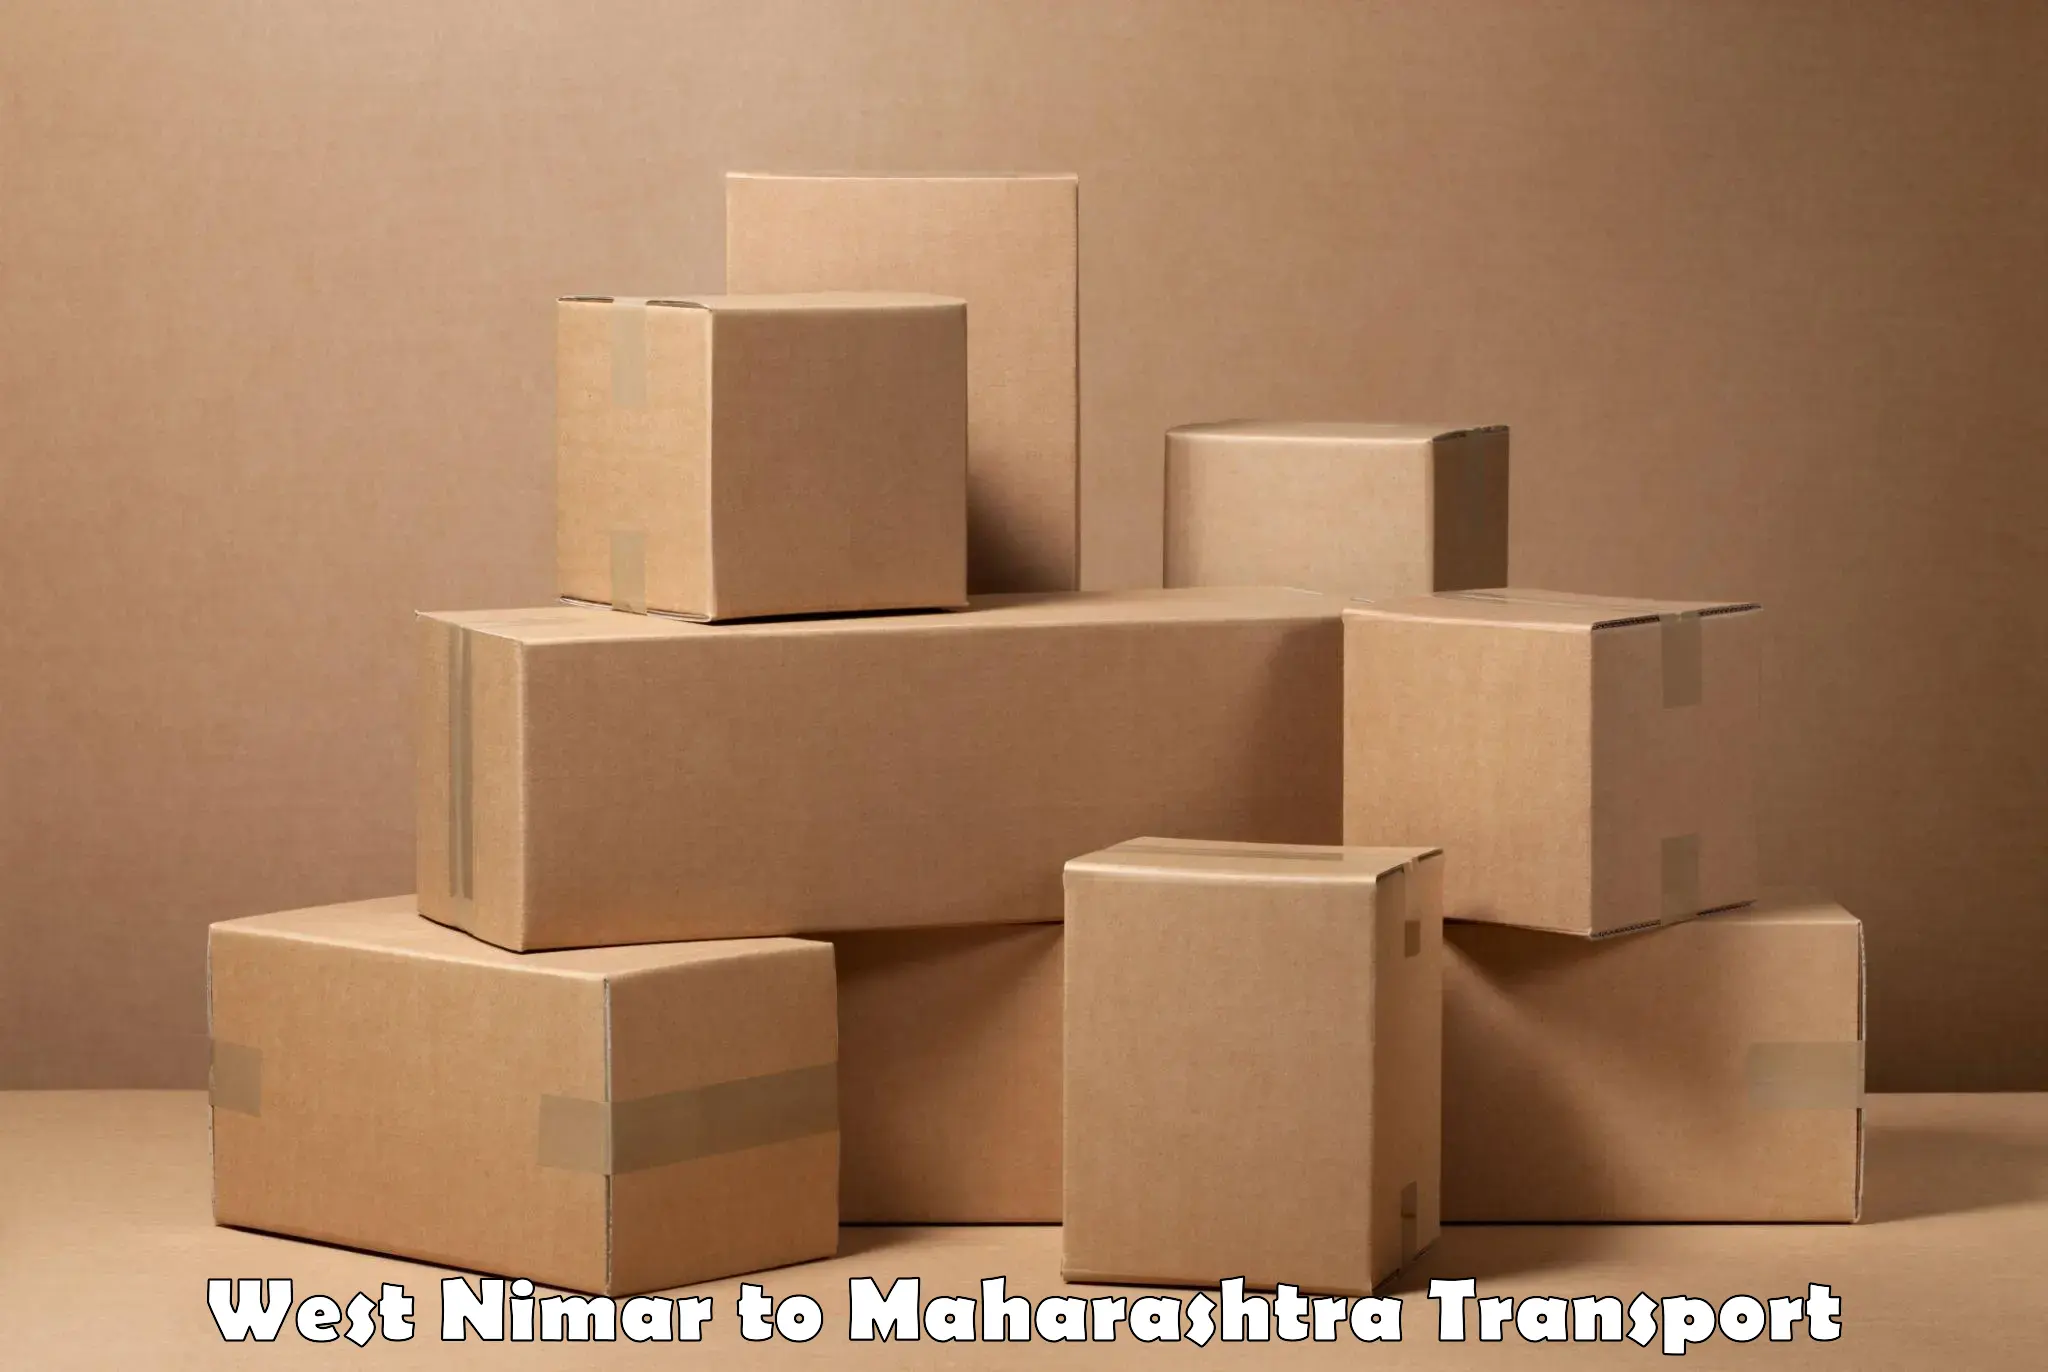 Vehicle transport services West Nimar to DY Patil Vidyapeeth Pune